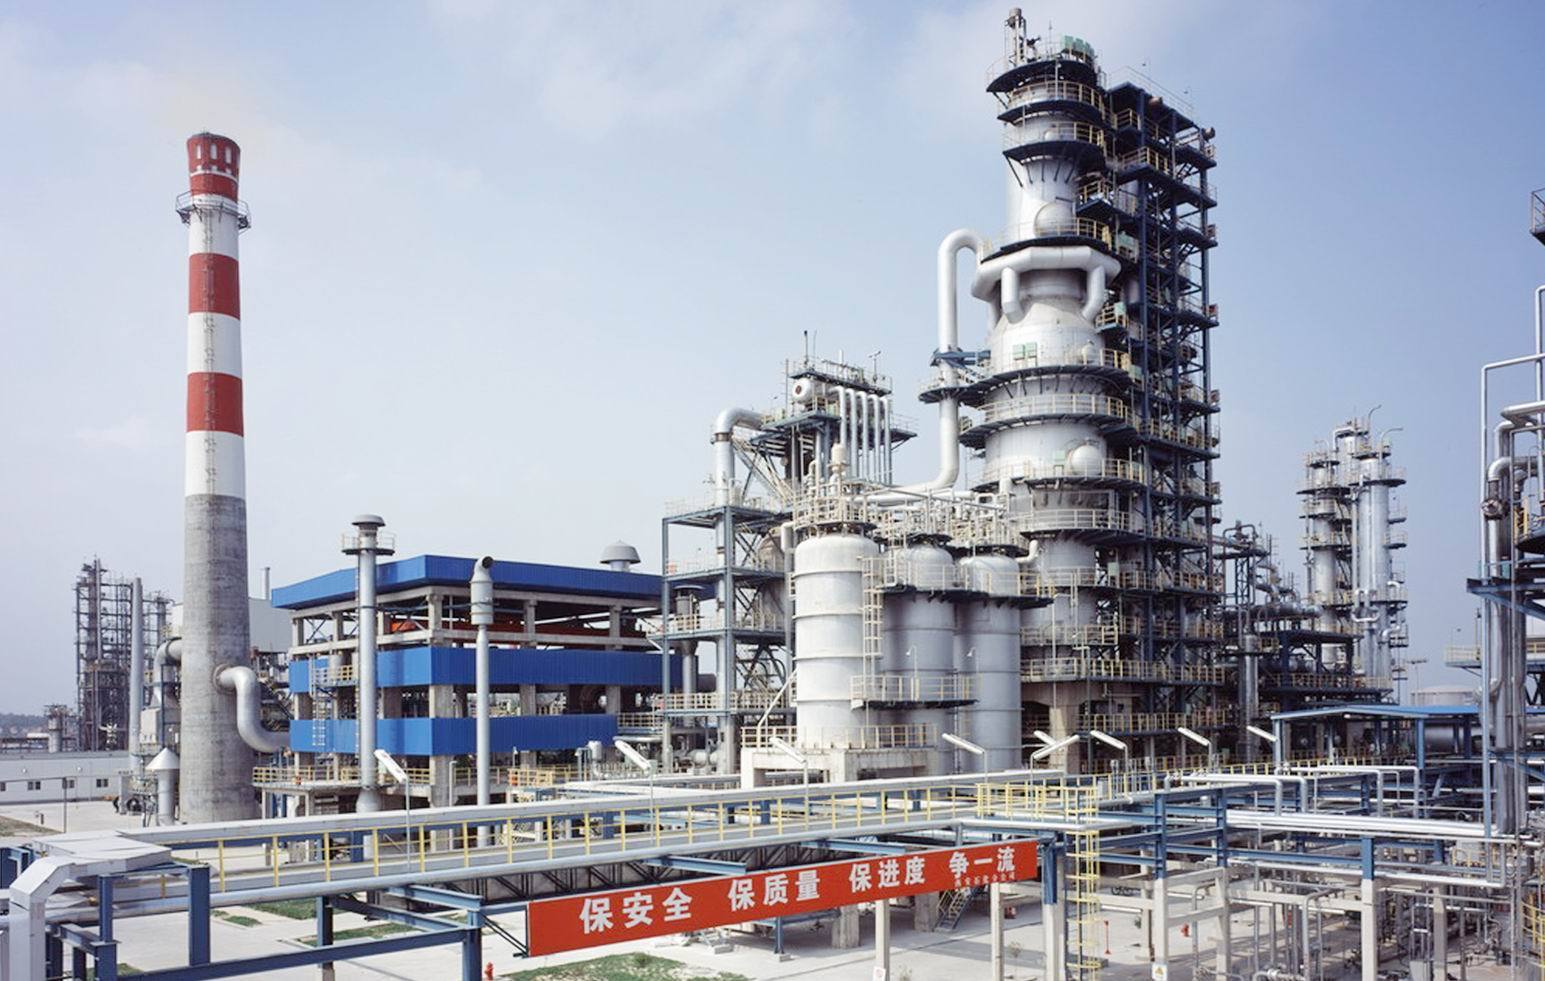 The local refineries are in a marginalized position in the competition with state oil giants. [China.org.cn]